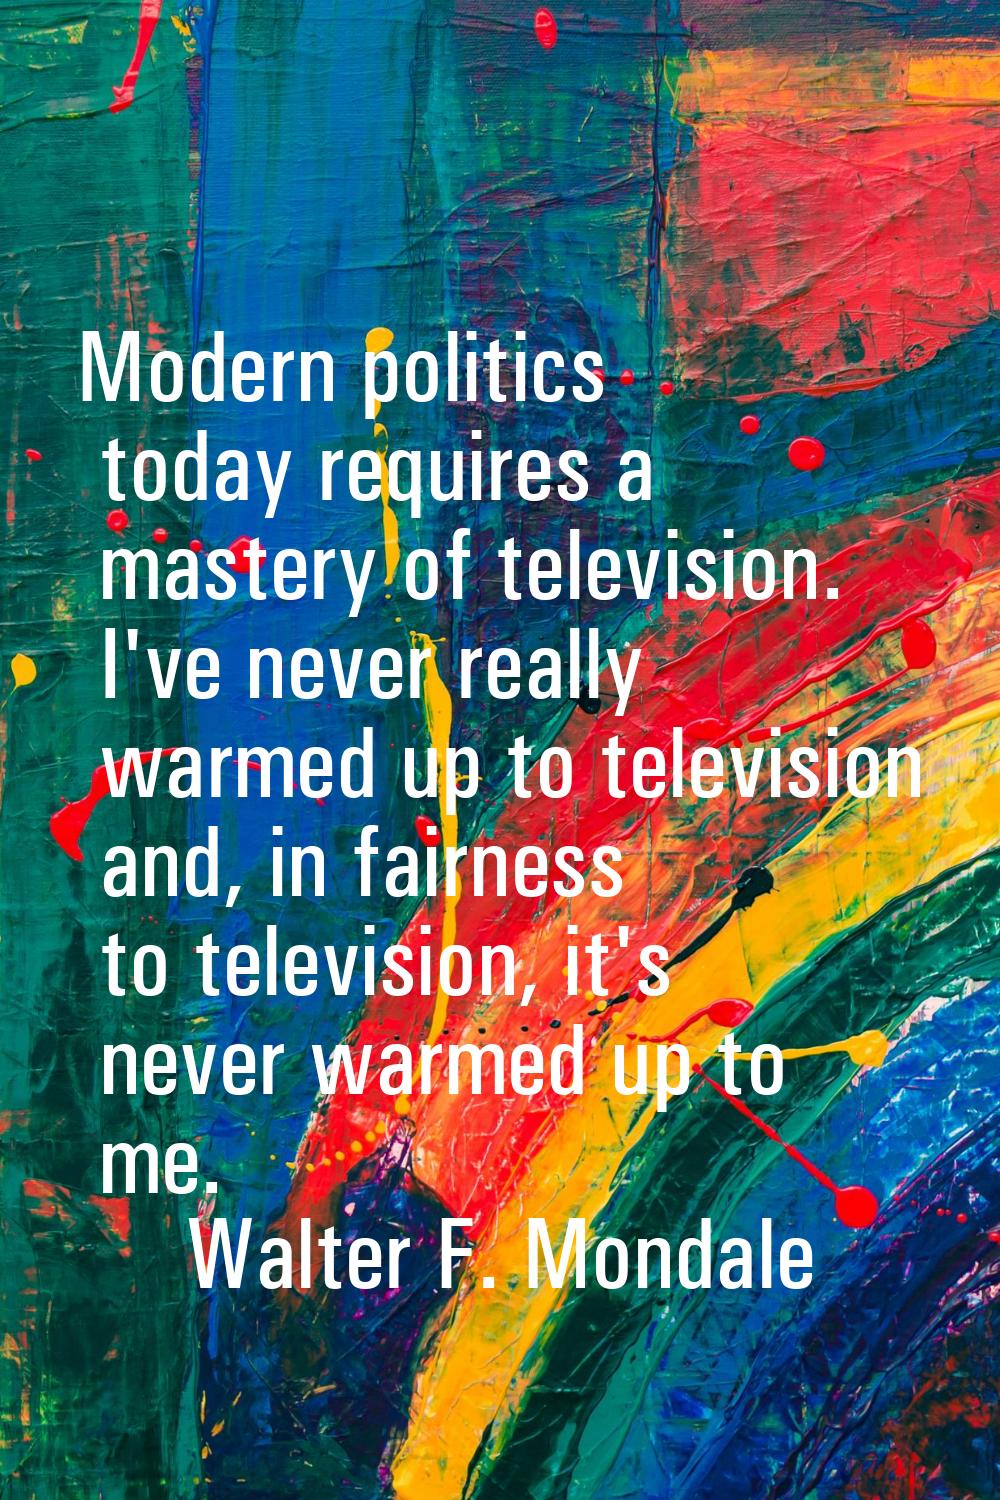 Modern politics today requires a mastery of television. I've never really warmed up to television a